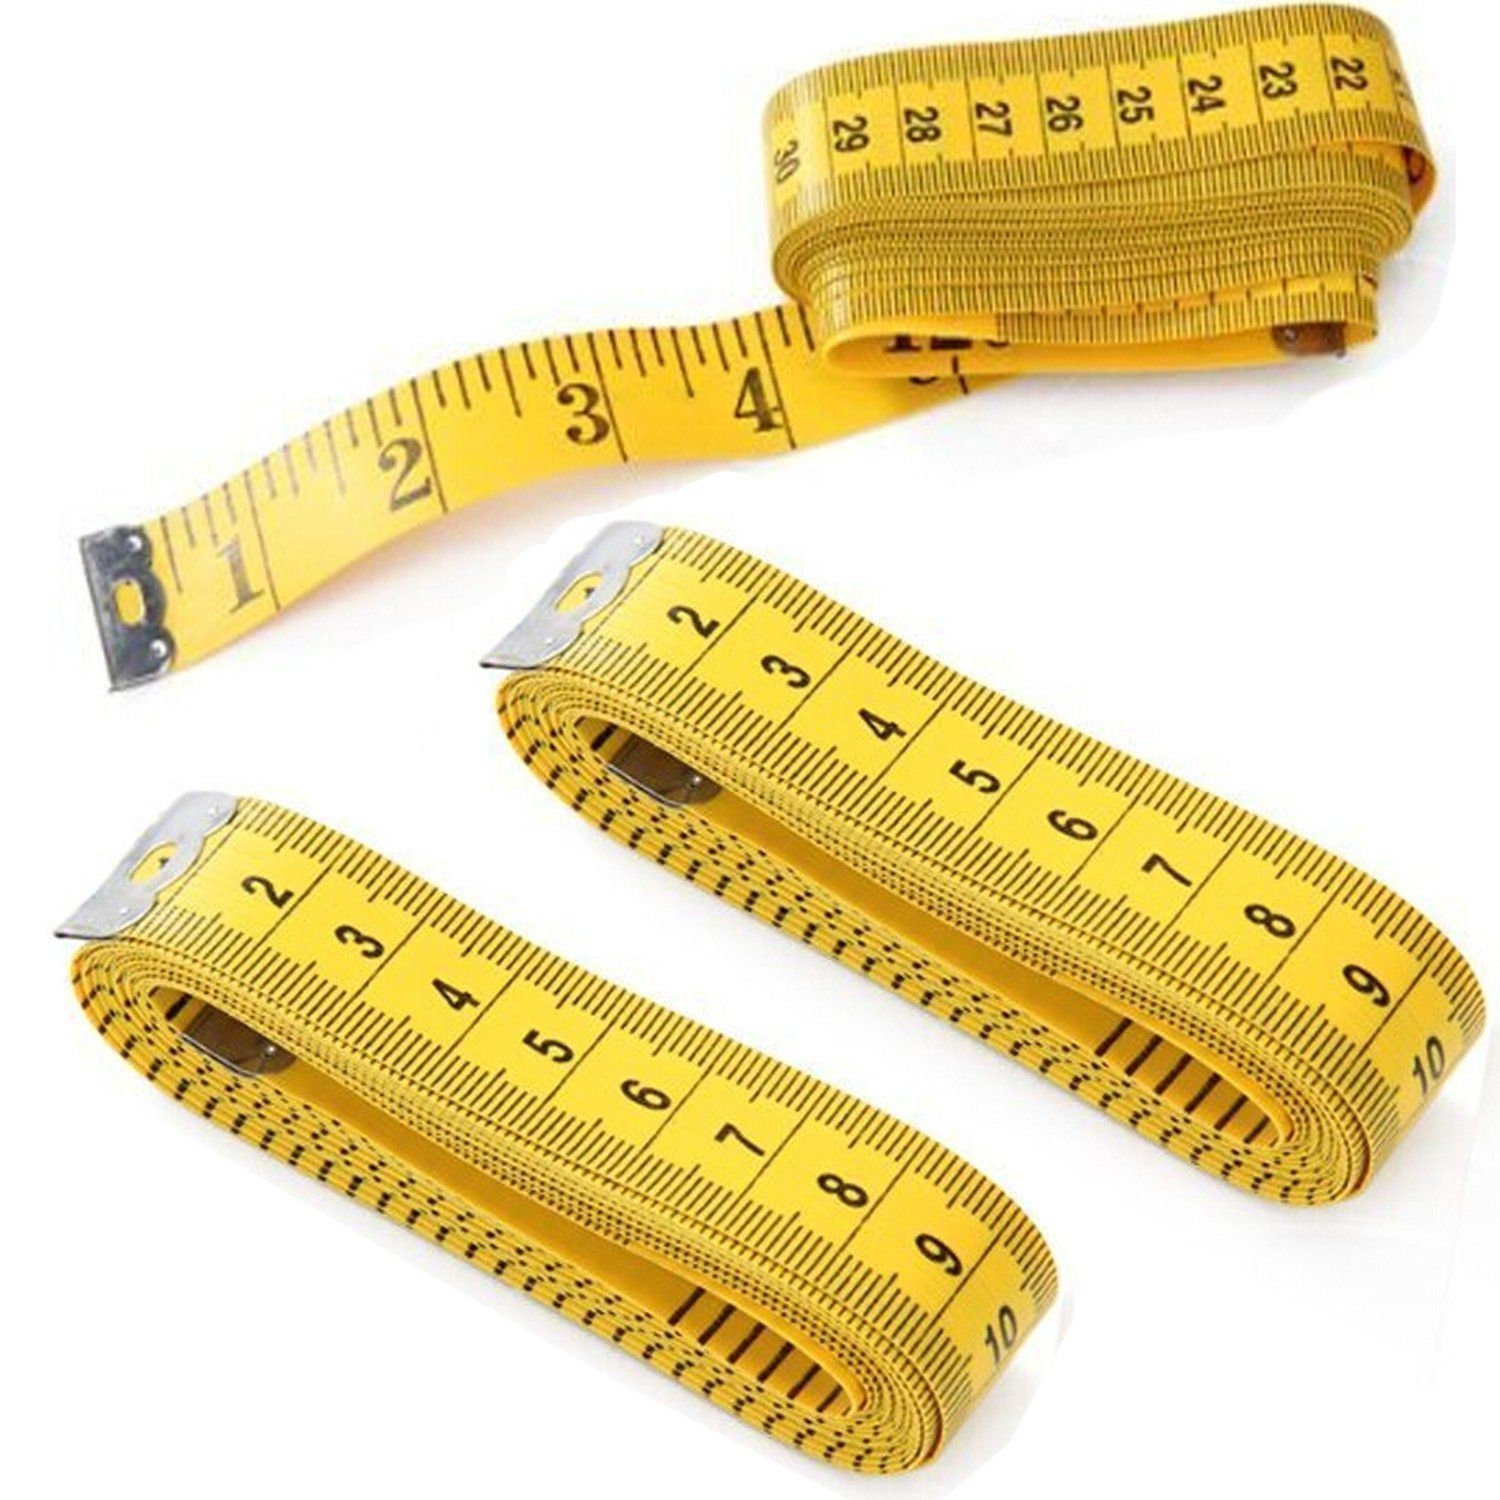 Soft Tailor Tape 300 Centimeters 120inches in Stock, White or Yellow -  China Clothing 3m Measuring Tape, Gift Clothing 3m Measuring Tape